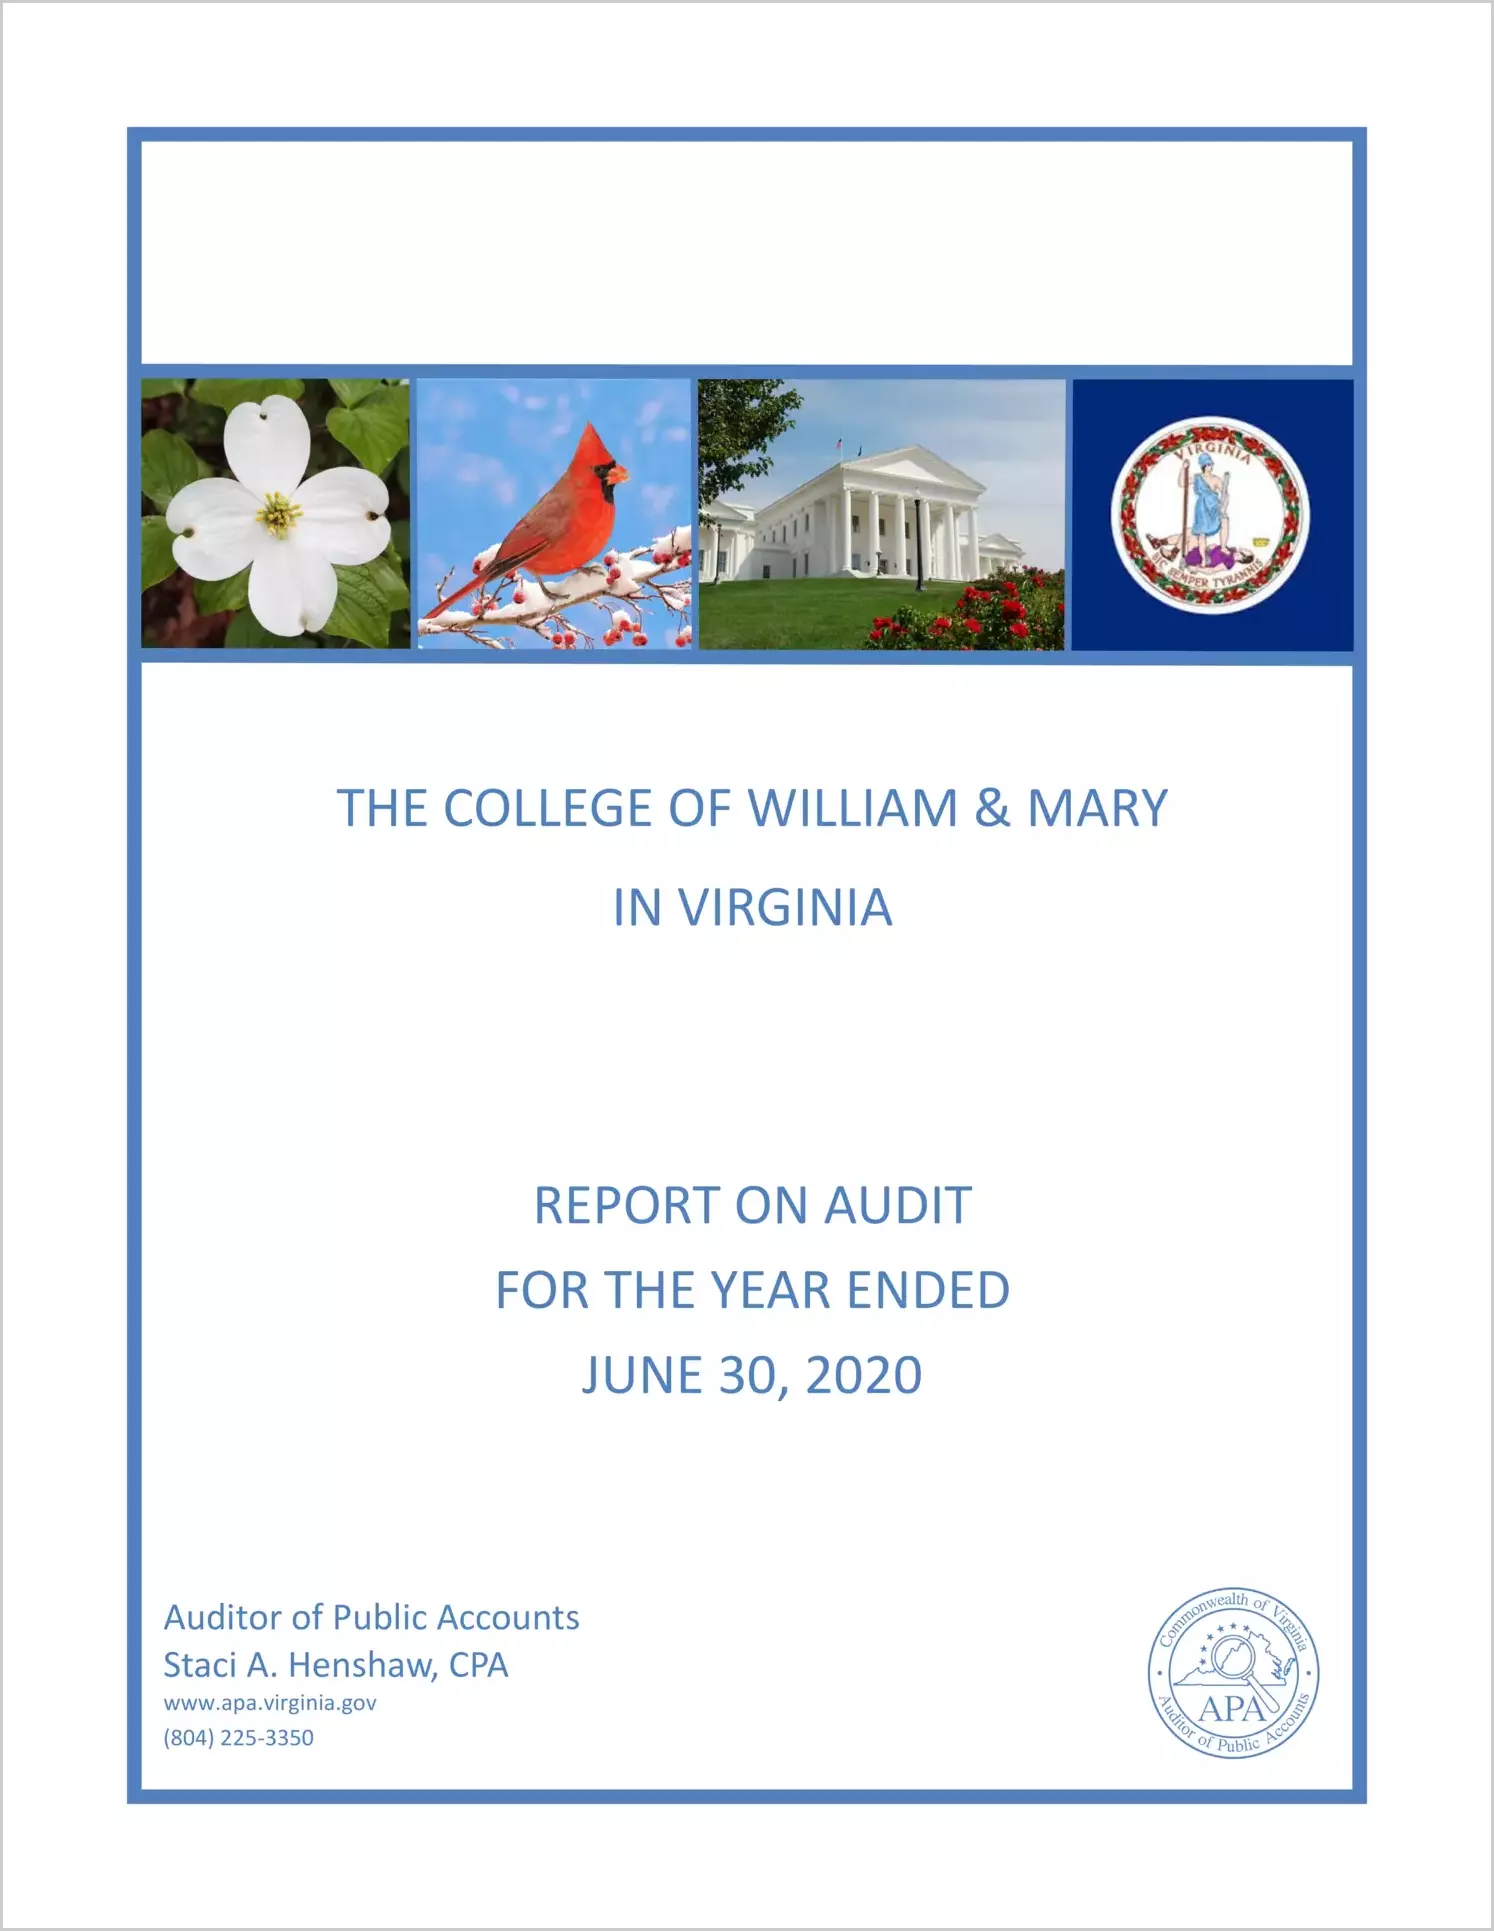 The College of William and Mary in Virginia for the year ended June 30, 2020